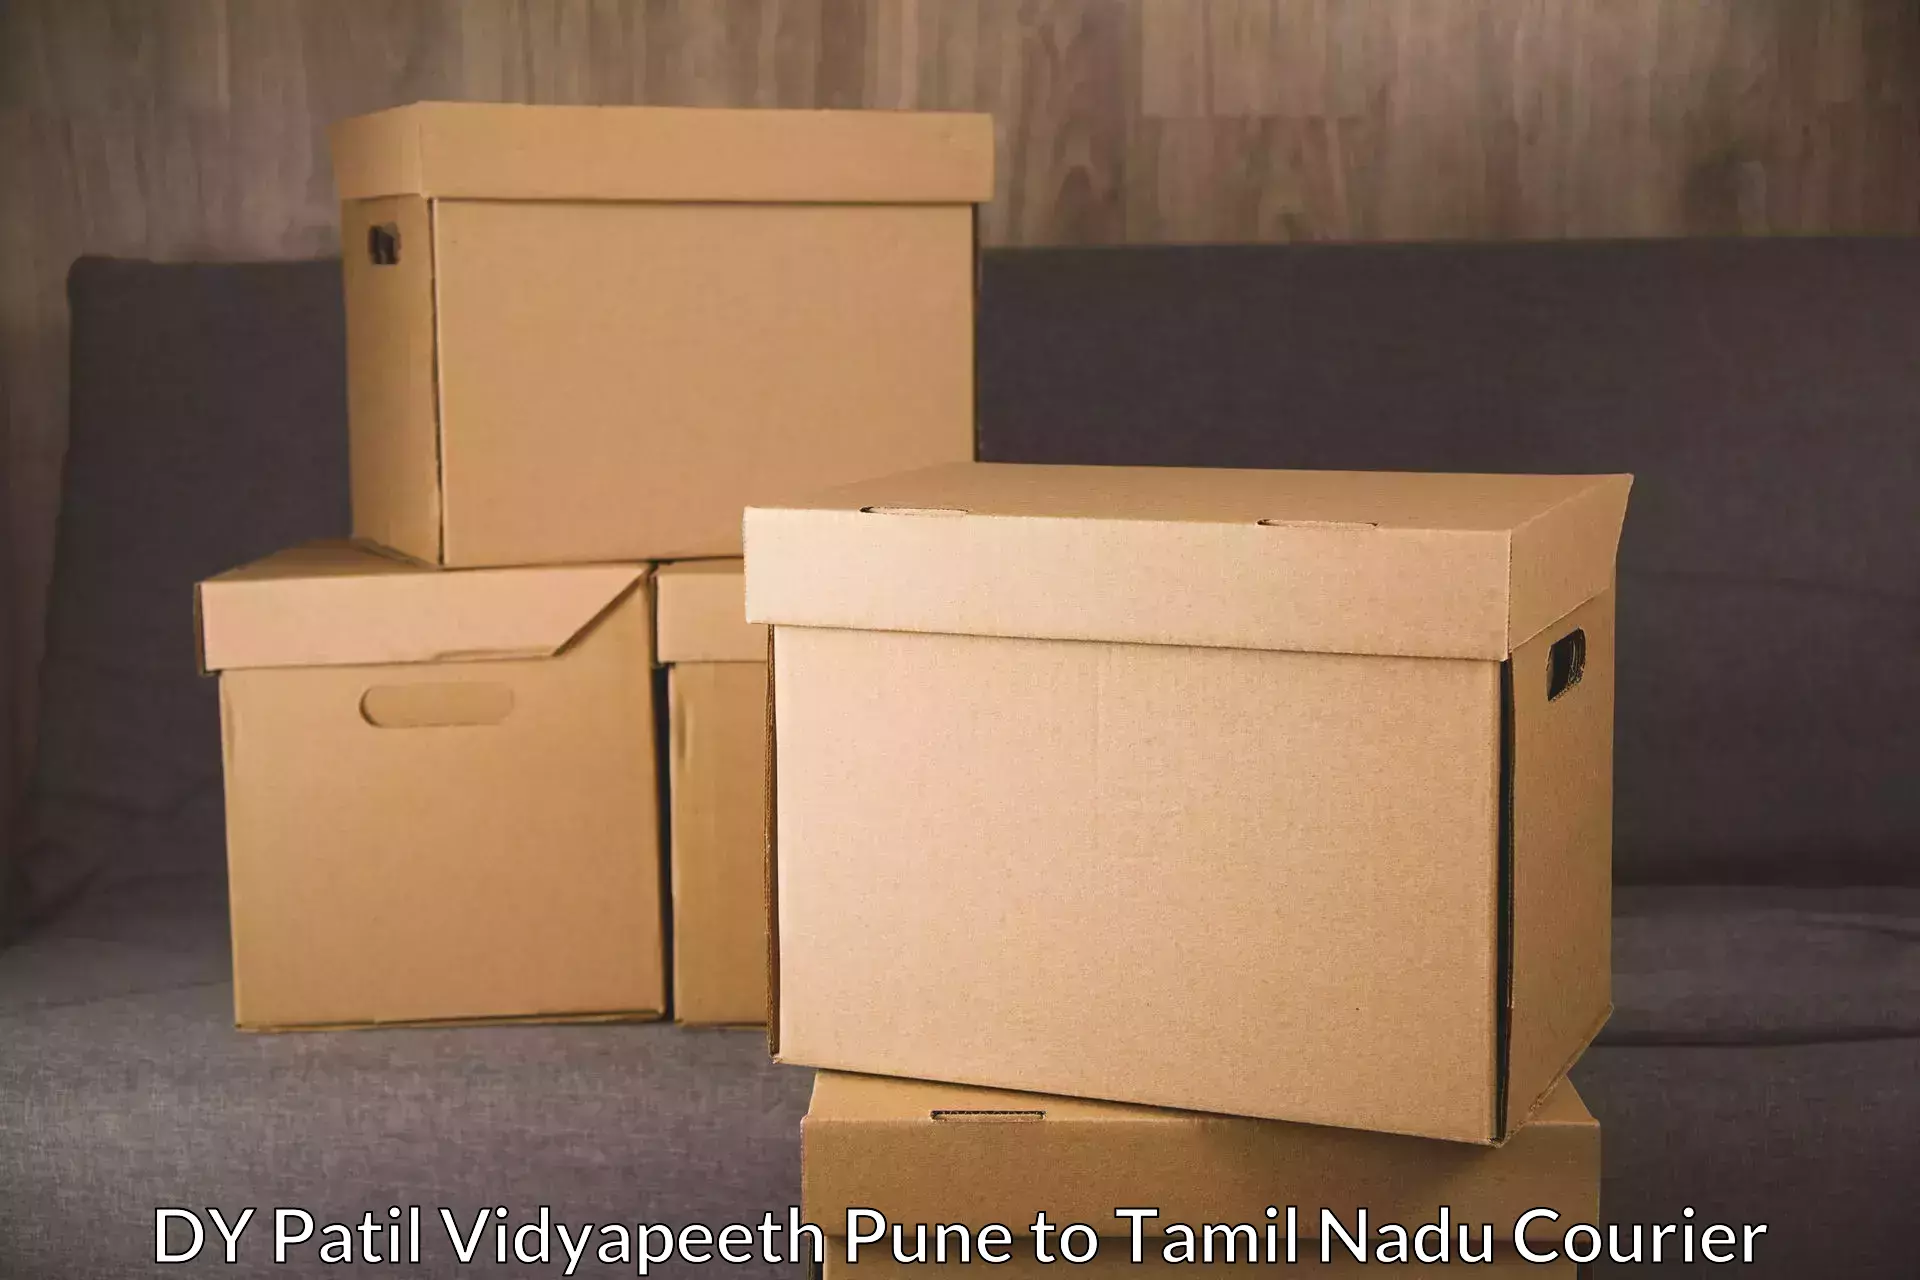 Quality courier partnerships DY Patil Vidyapeeth Pune to Chennai Port